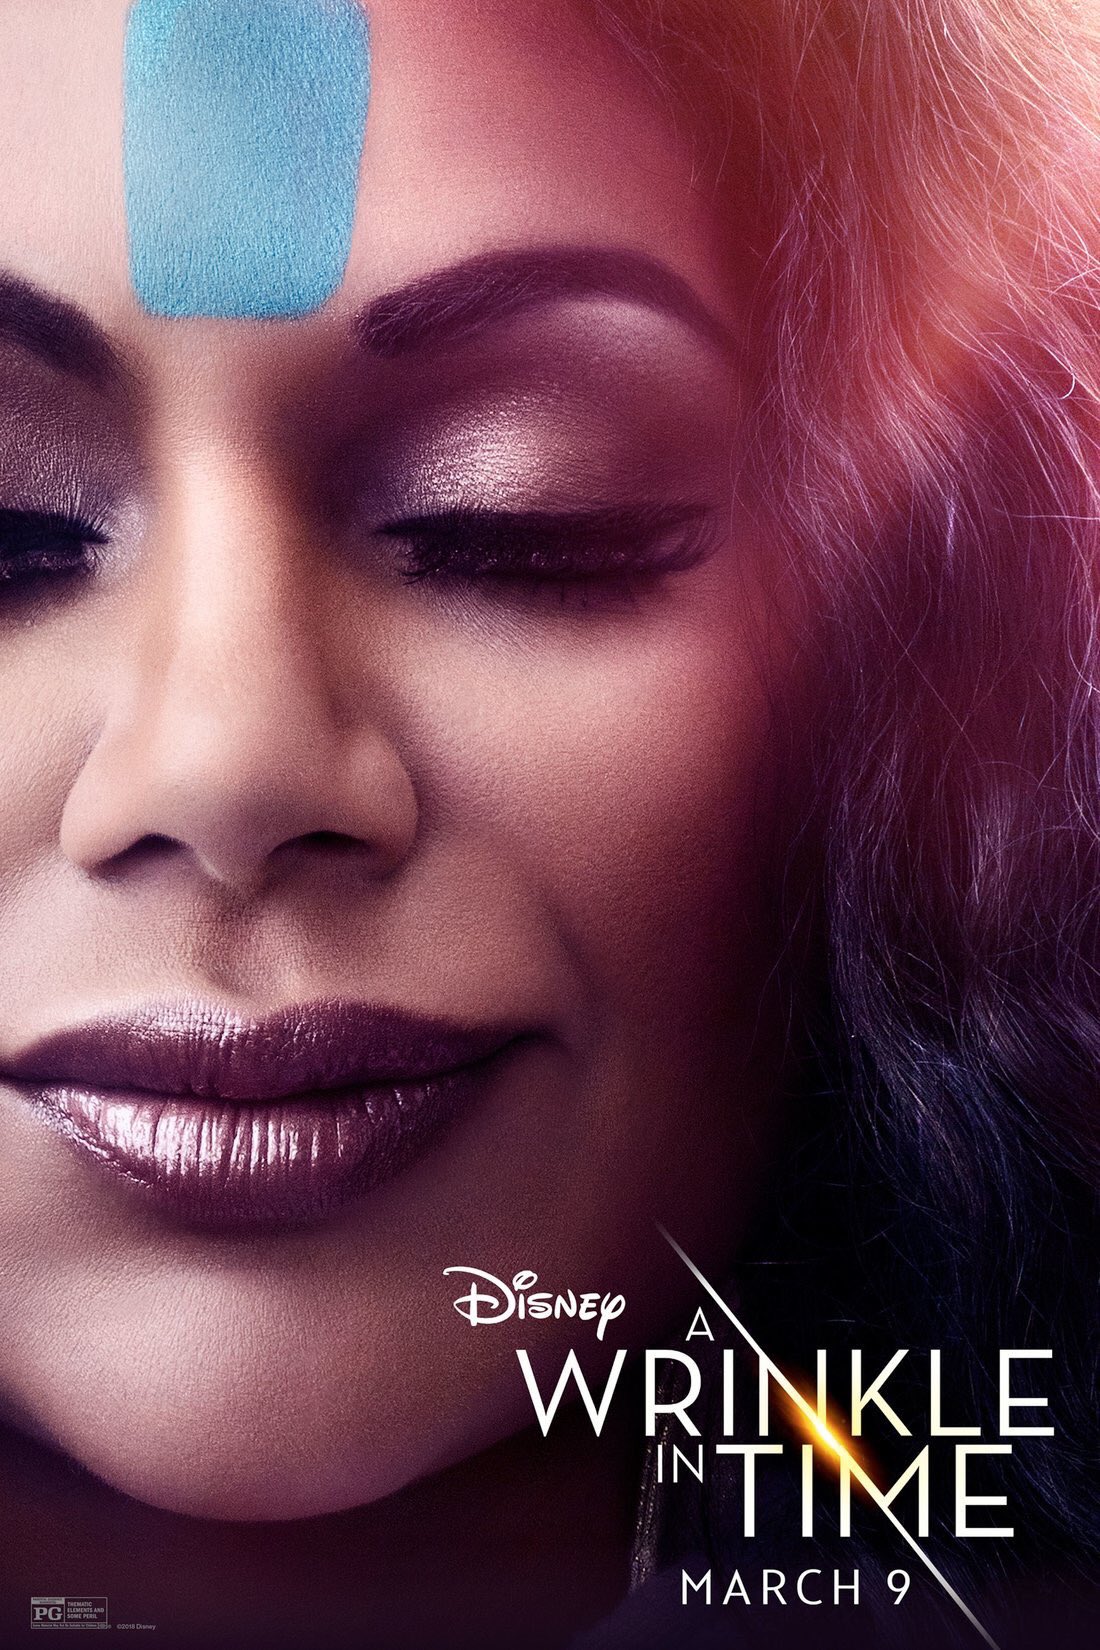  A Wrinkle in Time (2018) Poster - Mindy Kaling as Mrs. Who